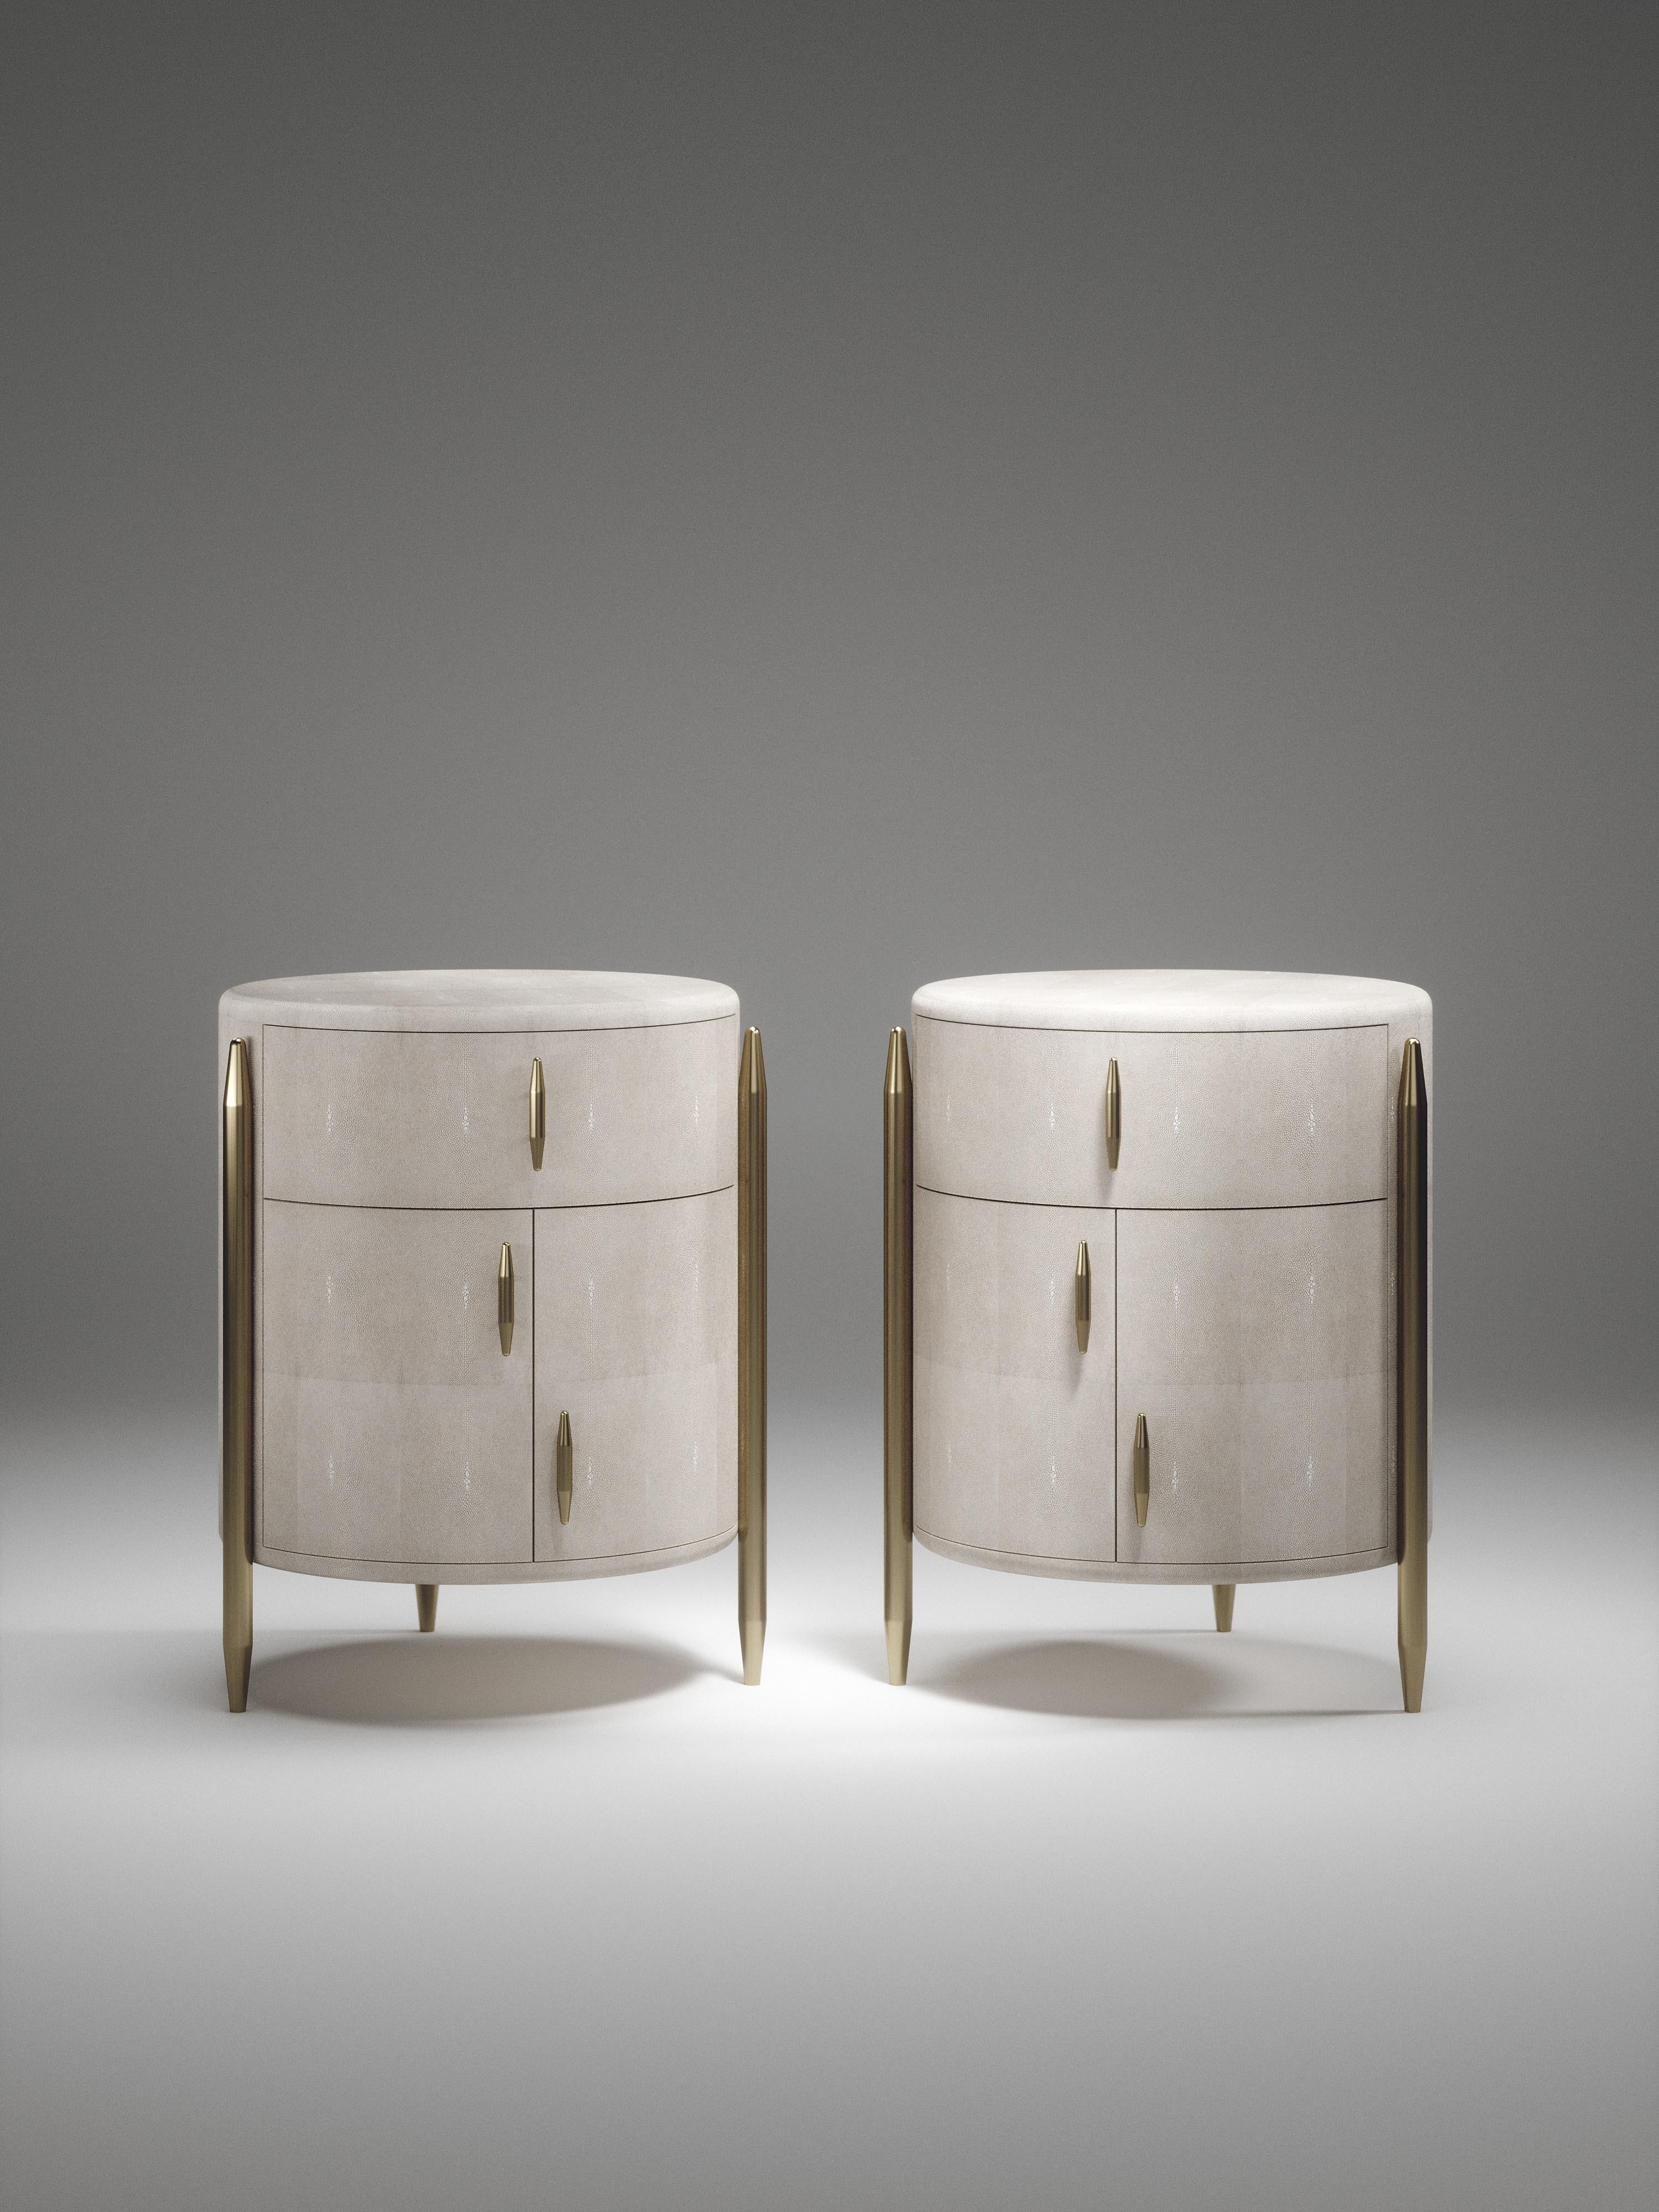 Pair of Shagreen Night Stands with Brass Accents by Kifu Paris For Sale 1